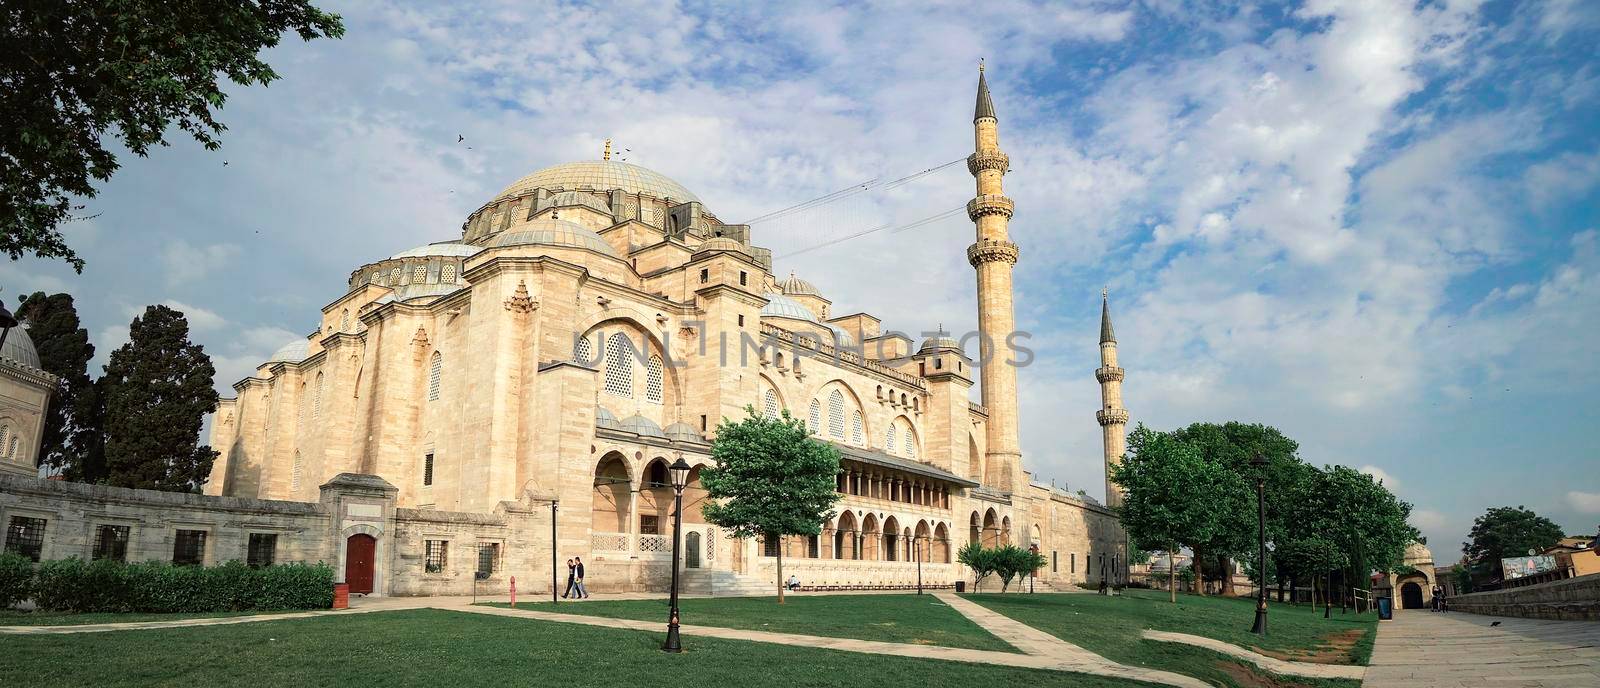 View of the majestic Suleiman Mosque in Istanbul, Turkey